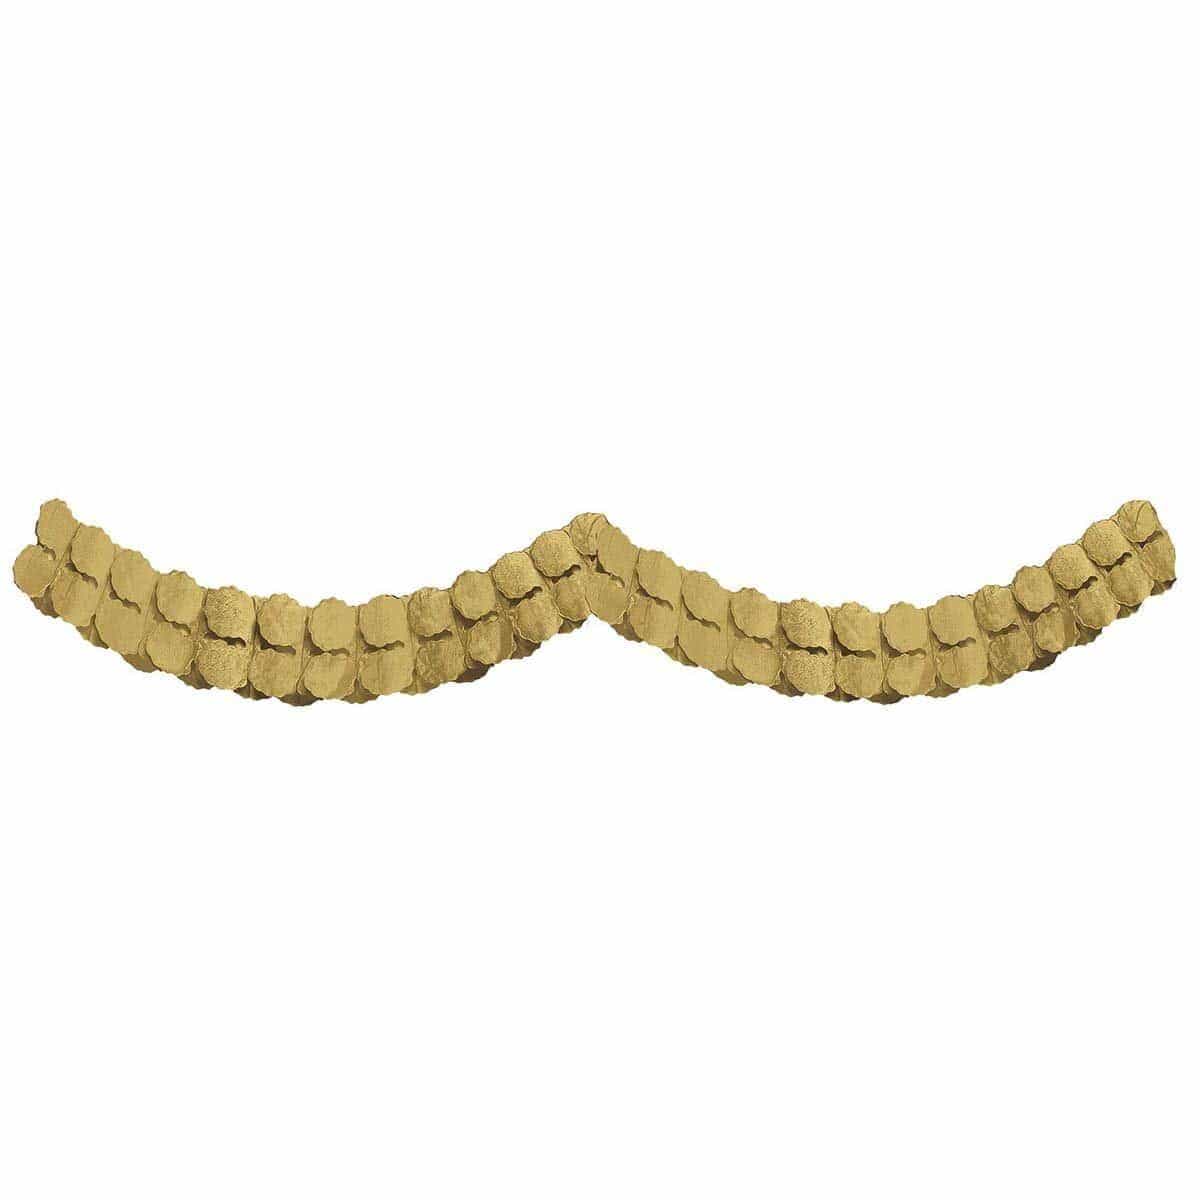 Buy Decorations Paper Garland - Gold 12 Ft sold at Party Expert